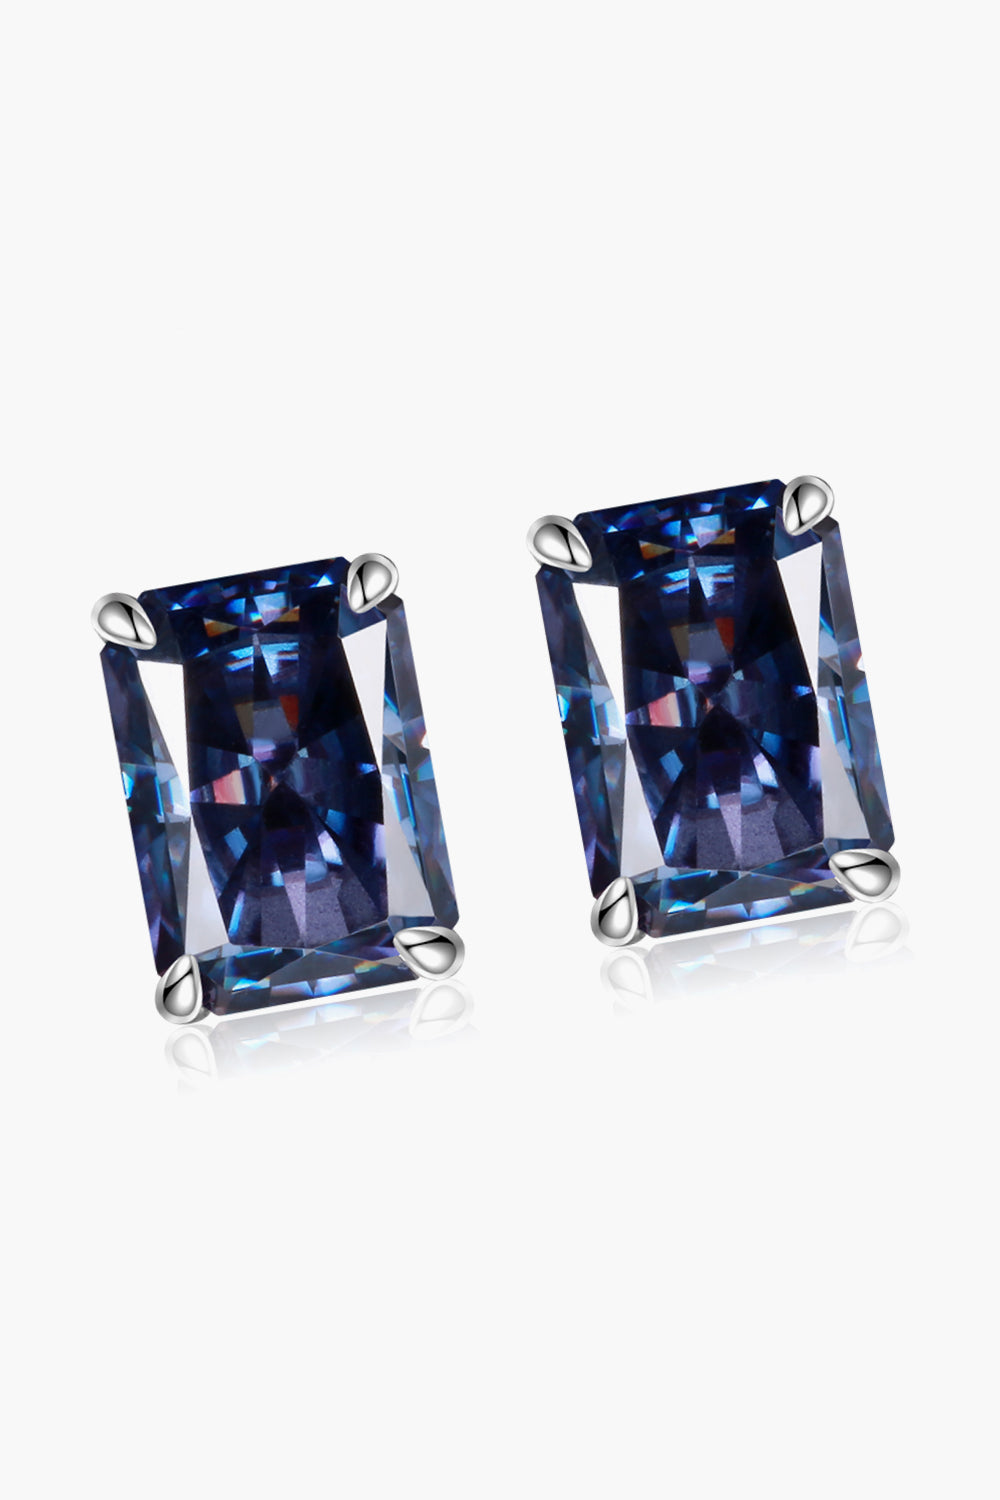 2 Carat Rectangle Moissanite 4-Prong Stud Earrings-Earrings-Inspired by Justeen-Women's Clothing Boutique in Chicago, Illinois